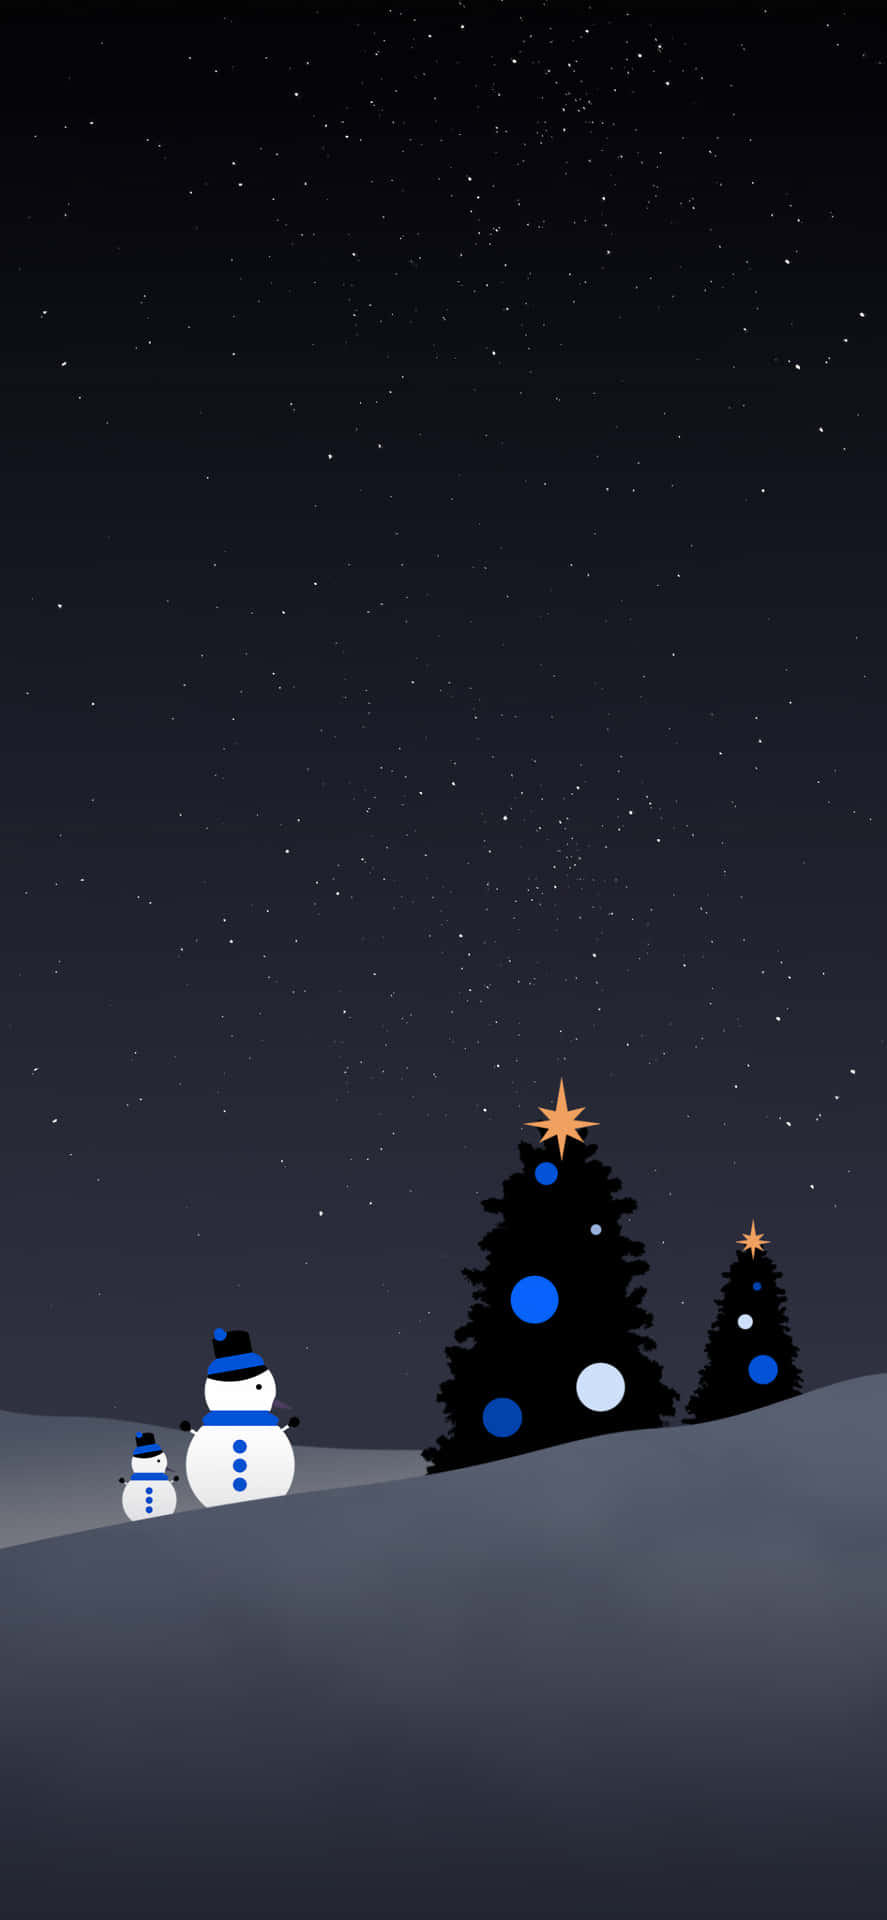 Enjoy the magic of Christmas night with friends and family Wallpaper